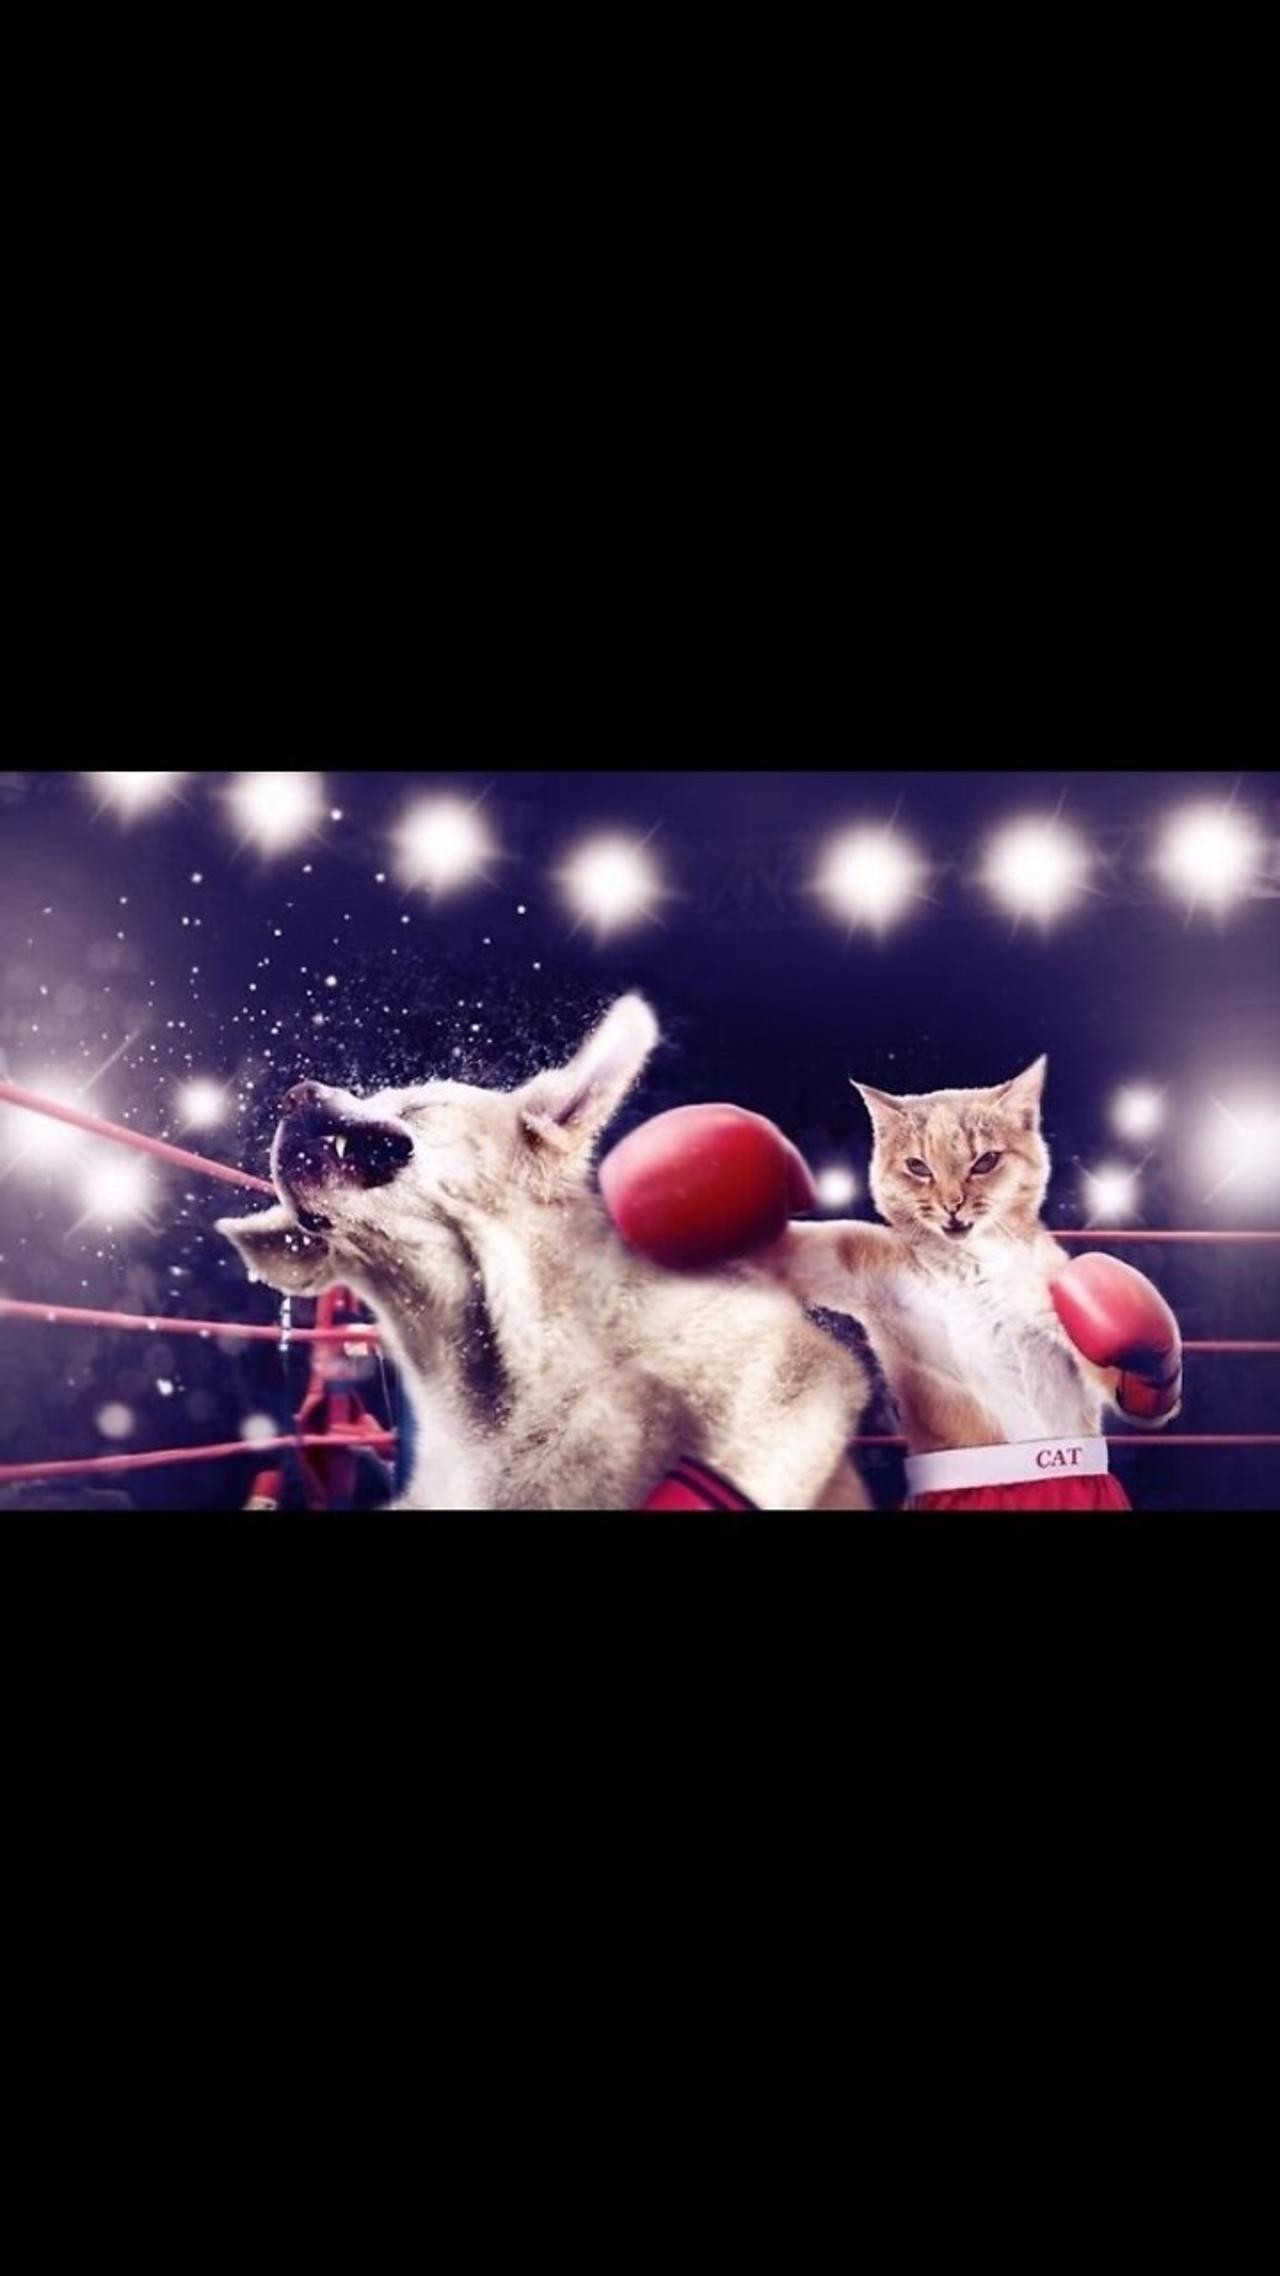 Cats and dogs fighting